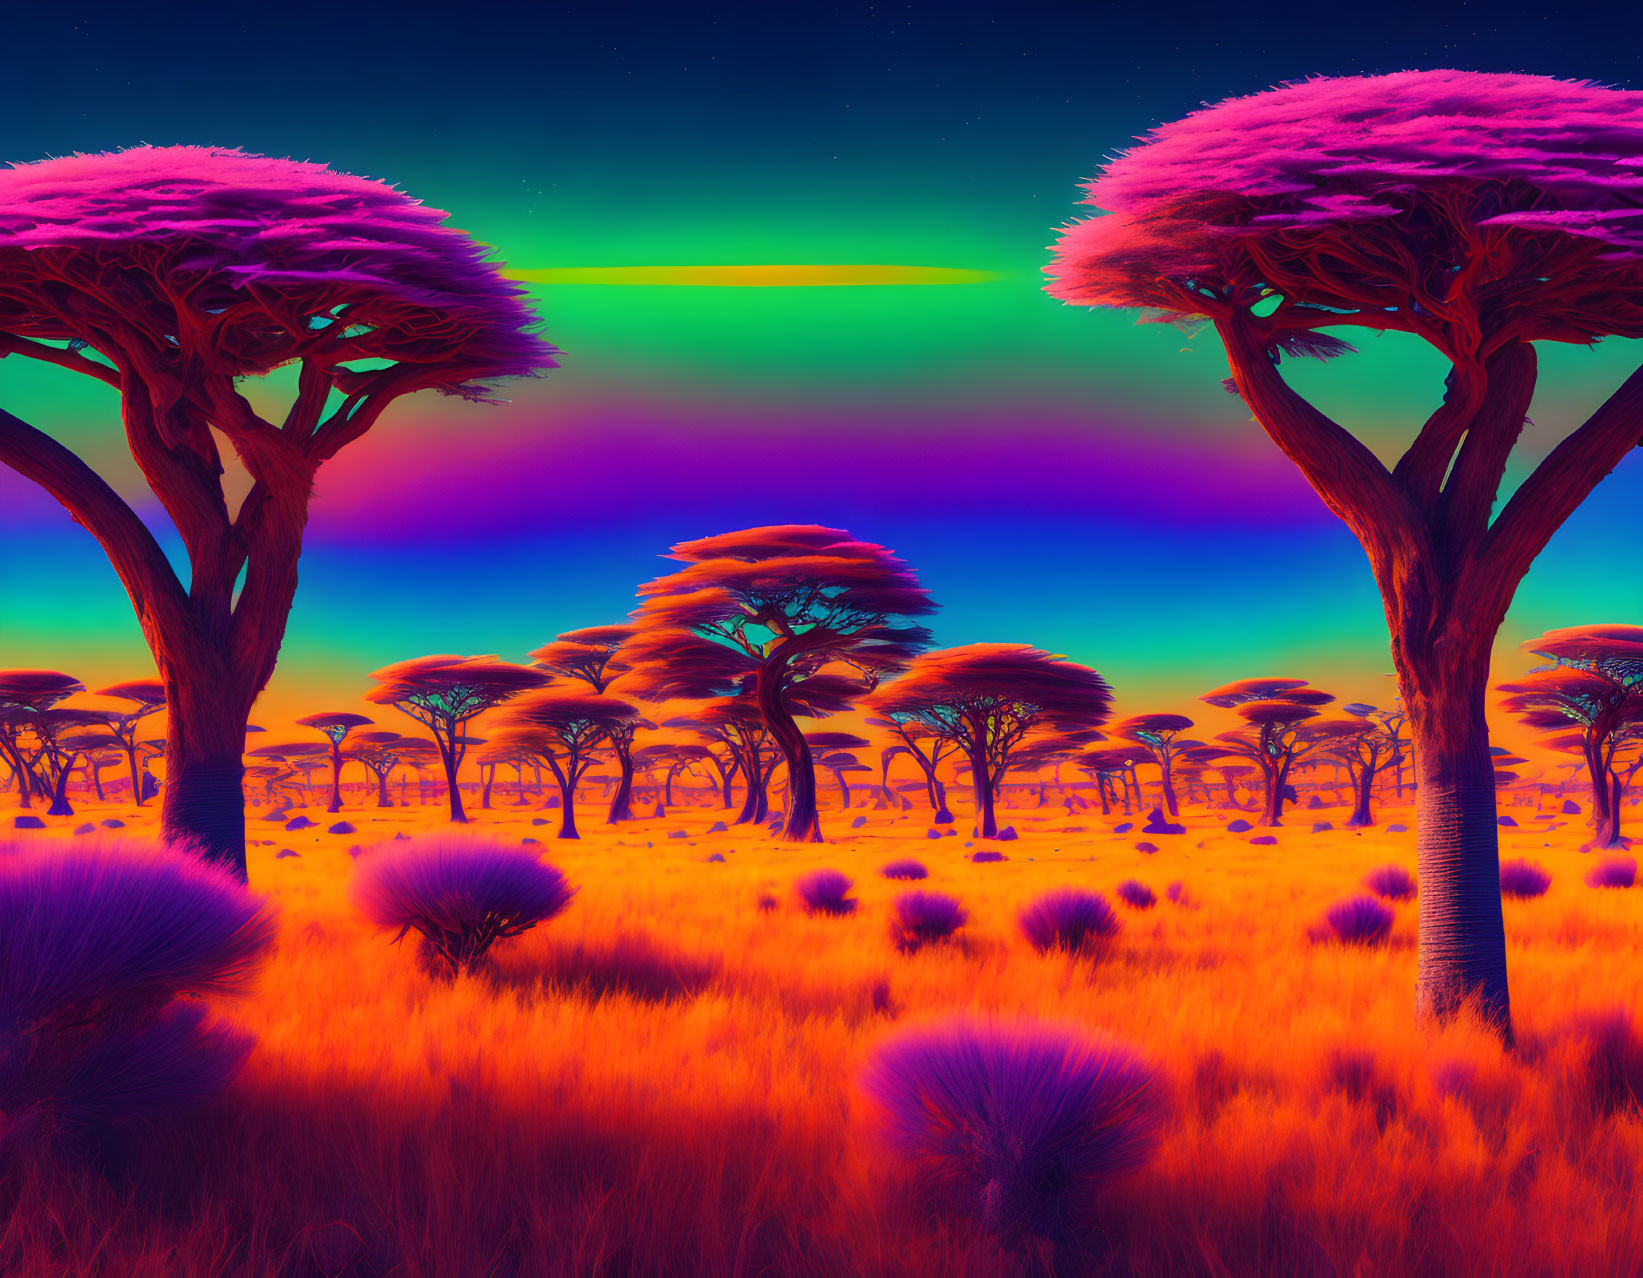 Surreal neon-lit landscape with African acacia trees